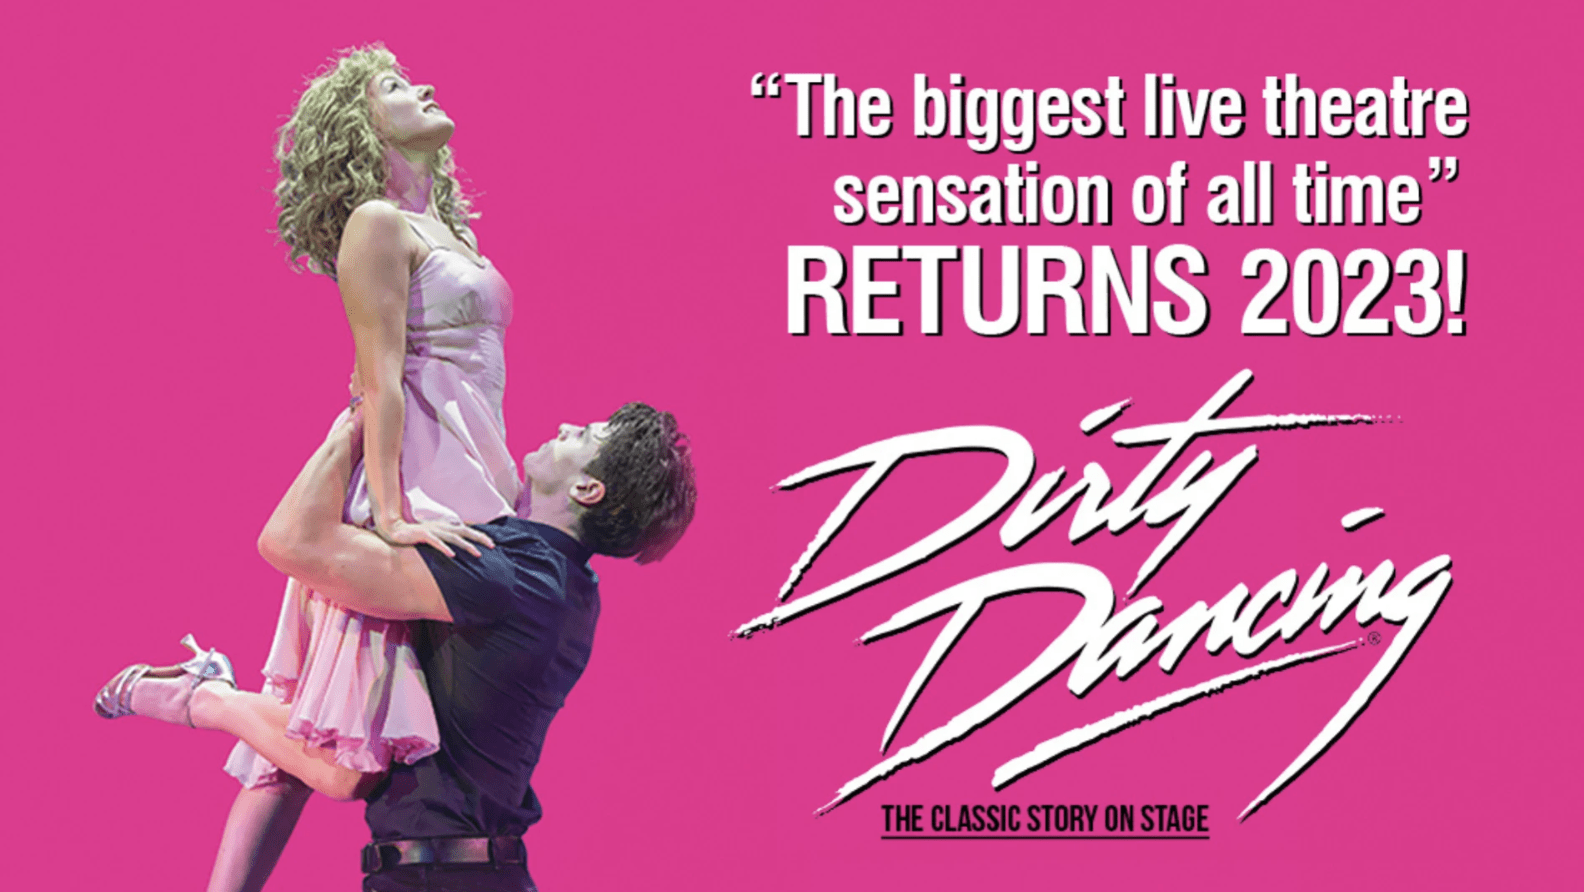 Dirty Dancing returns following a season at London’s Dominion Theatre. Exploding with heart-pounding music, breath-taking emotion and sensationally sexy dancing.